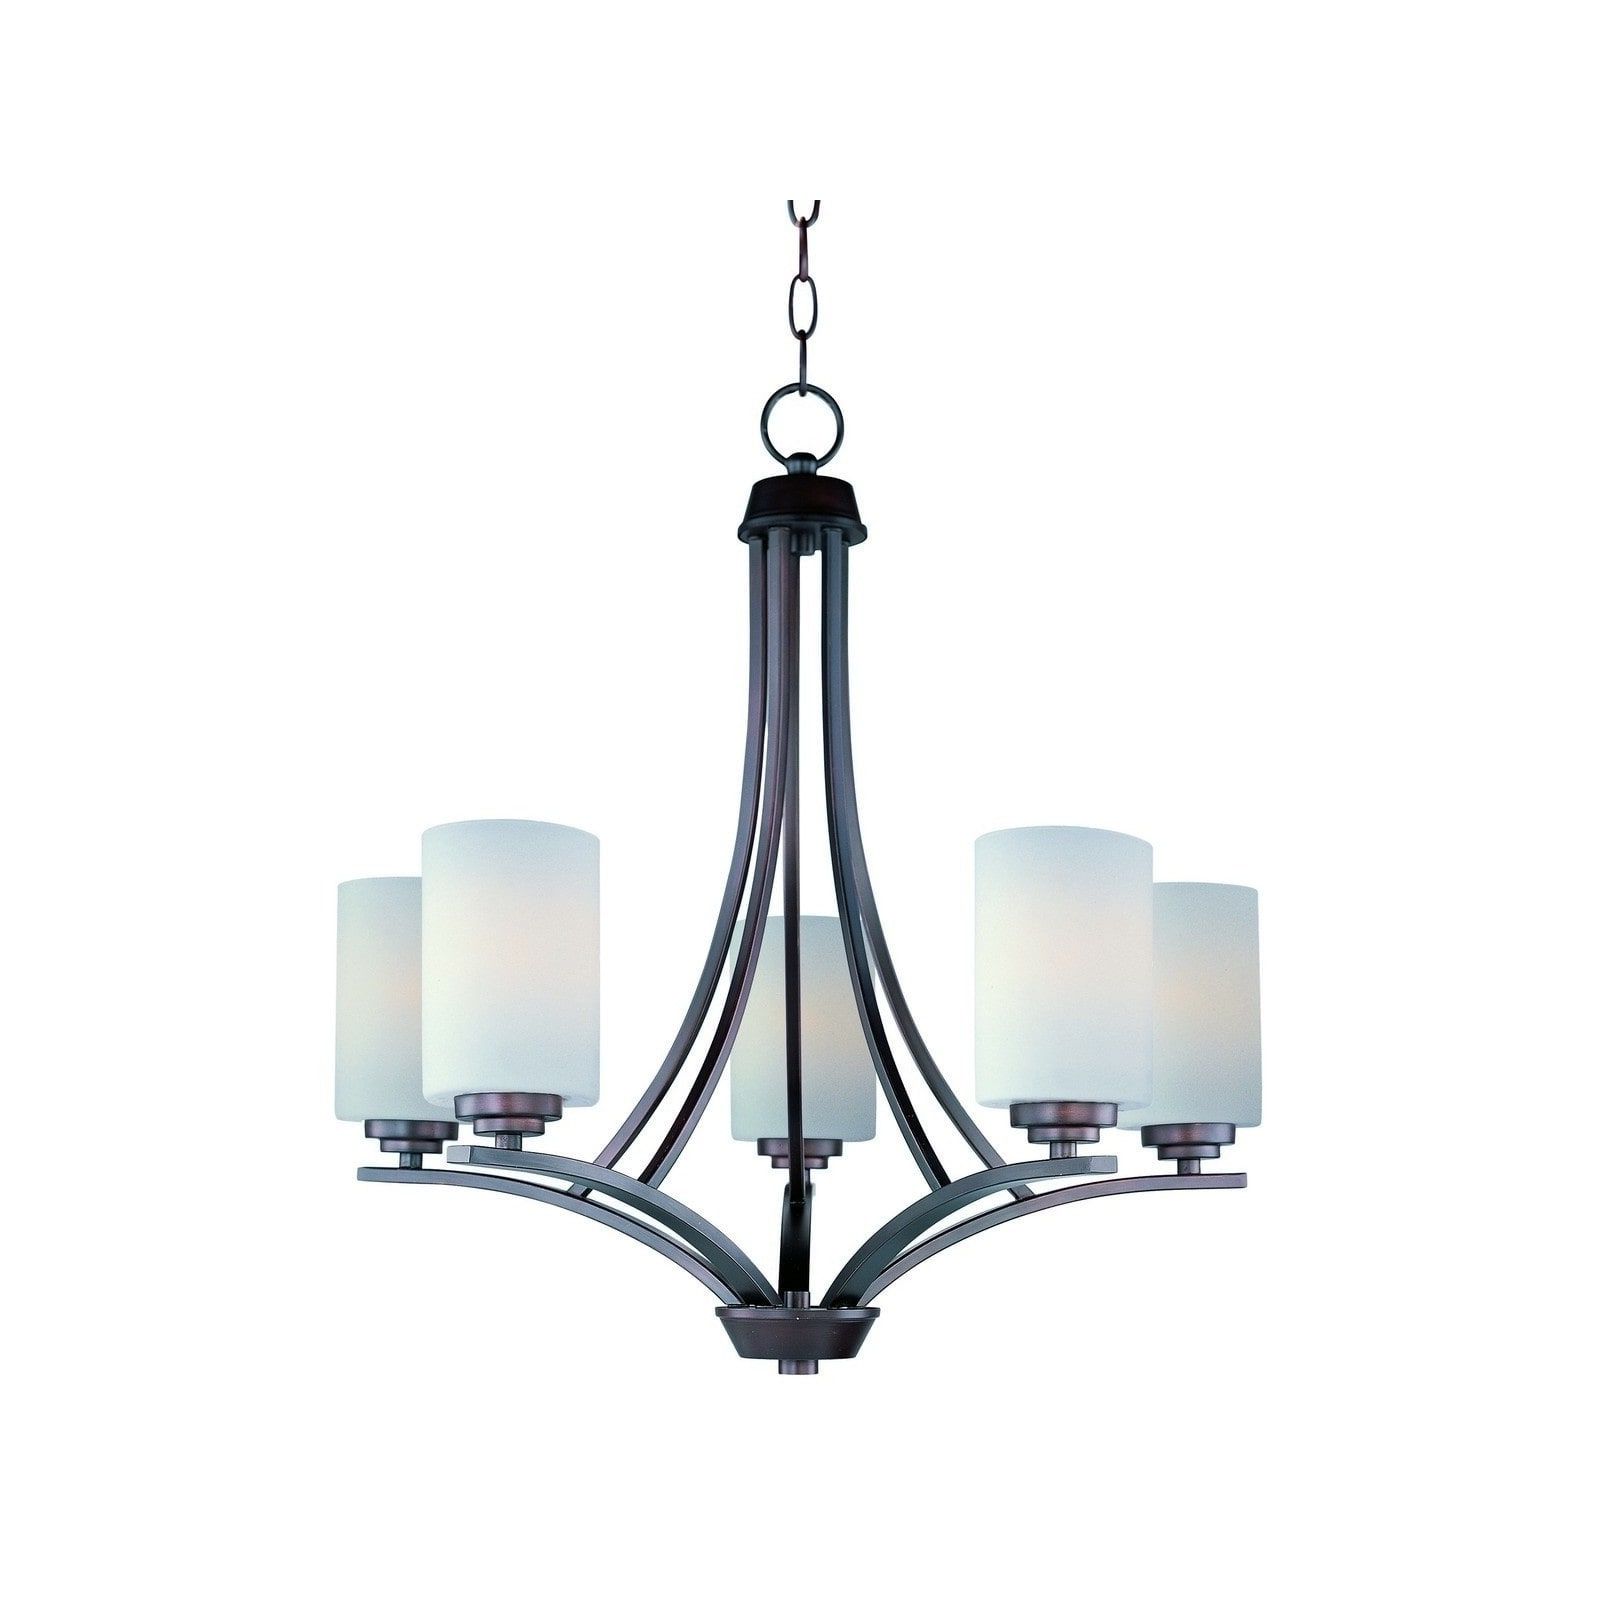 Satin Nickel Five Light Single Tier Chandeliers Within Most Up To Date Shop Maxim Satin White Shade 5 Light Bronze Deven Single (View 4 of 20)